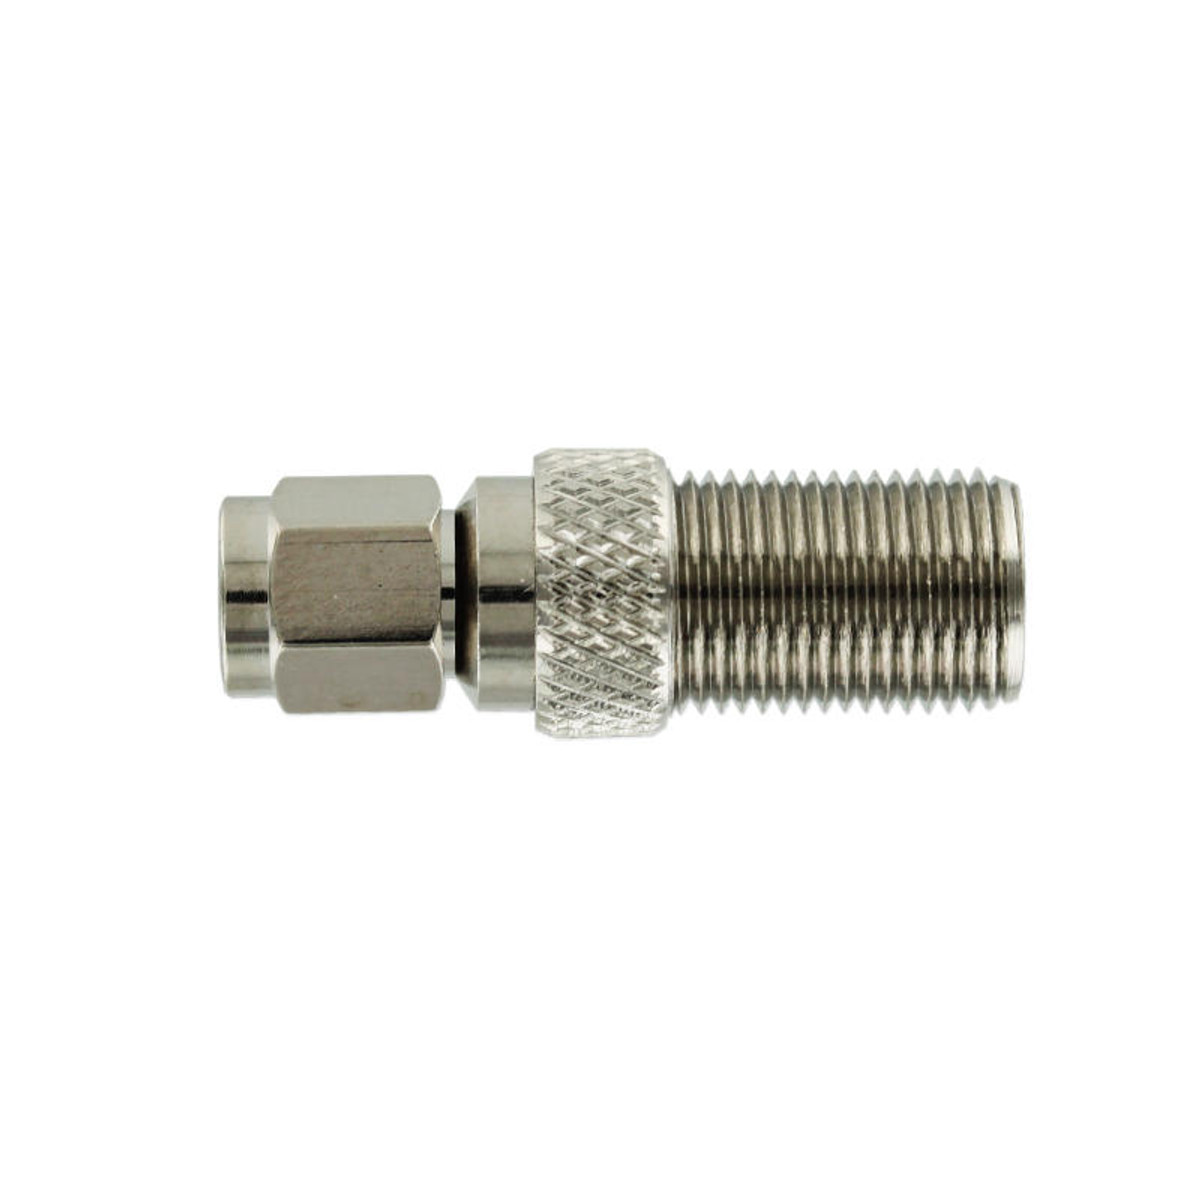 Wilson Electronics weBoost Wilson 971165 F-Female to SMA-Male Connector